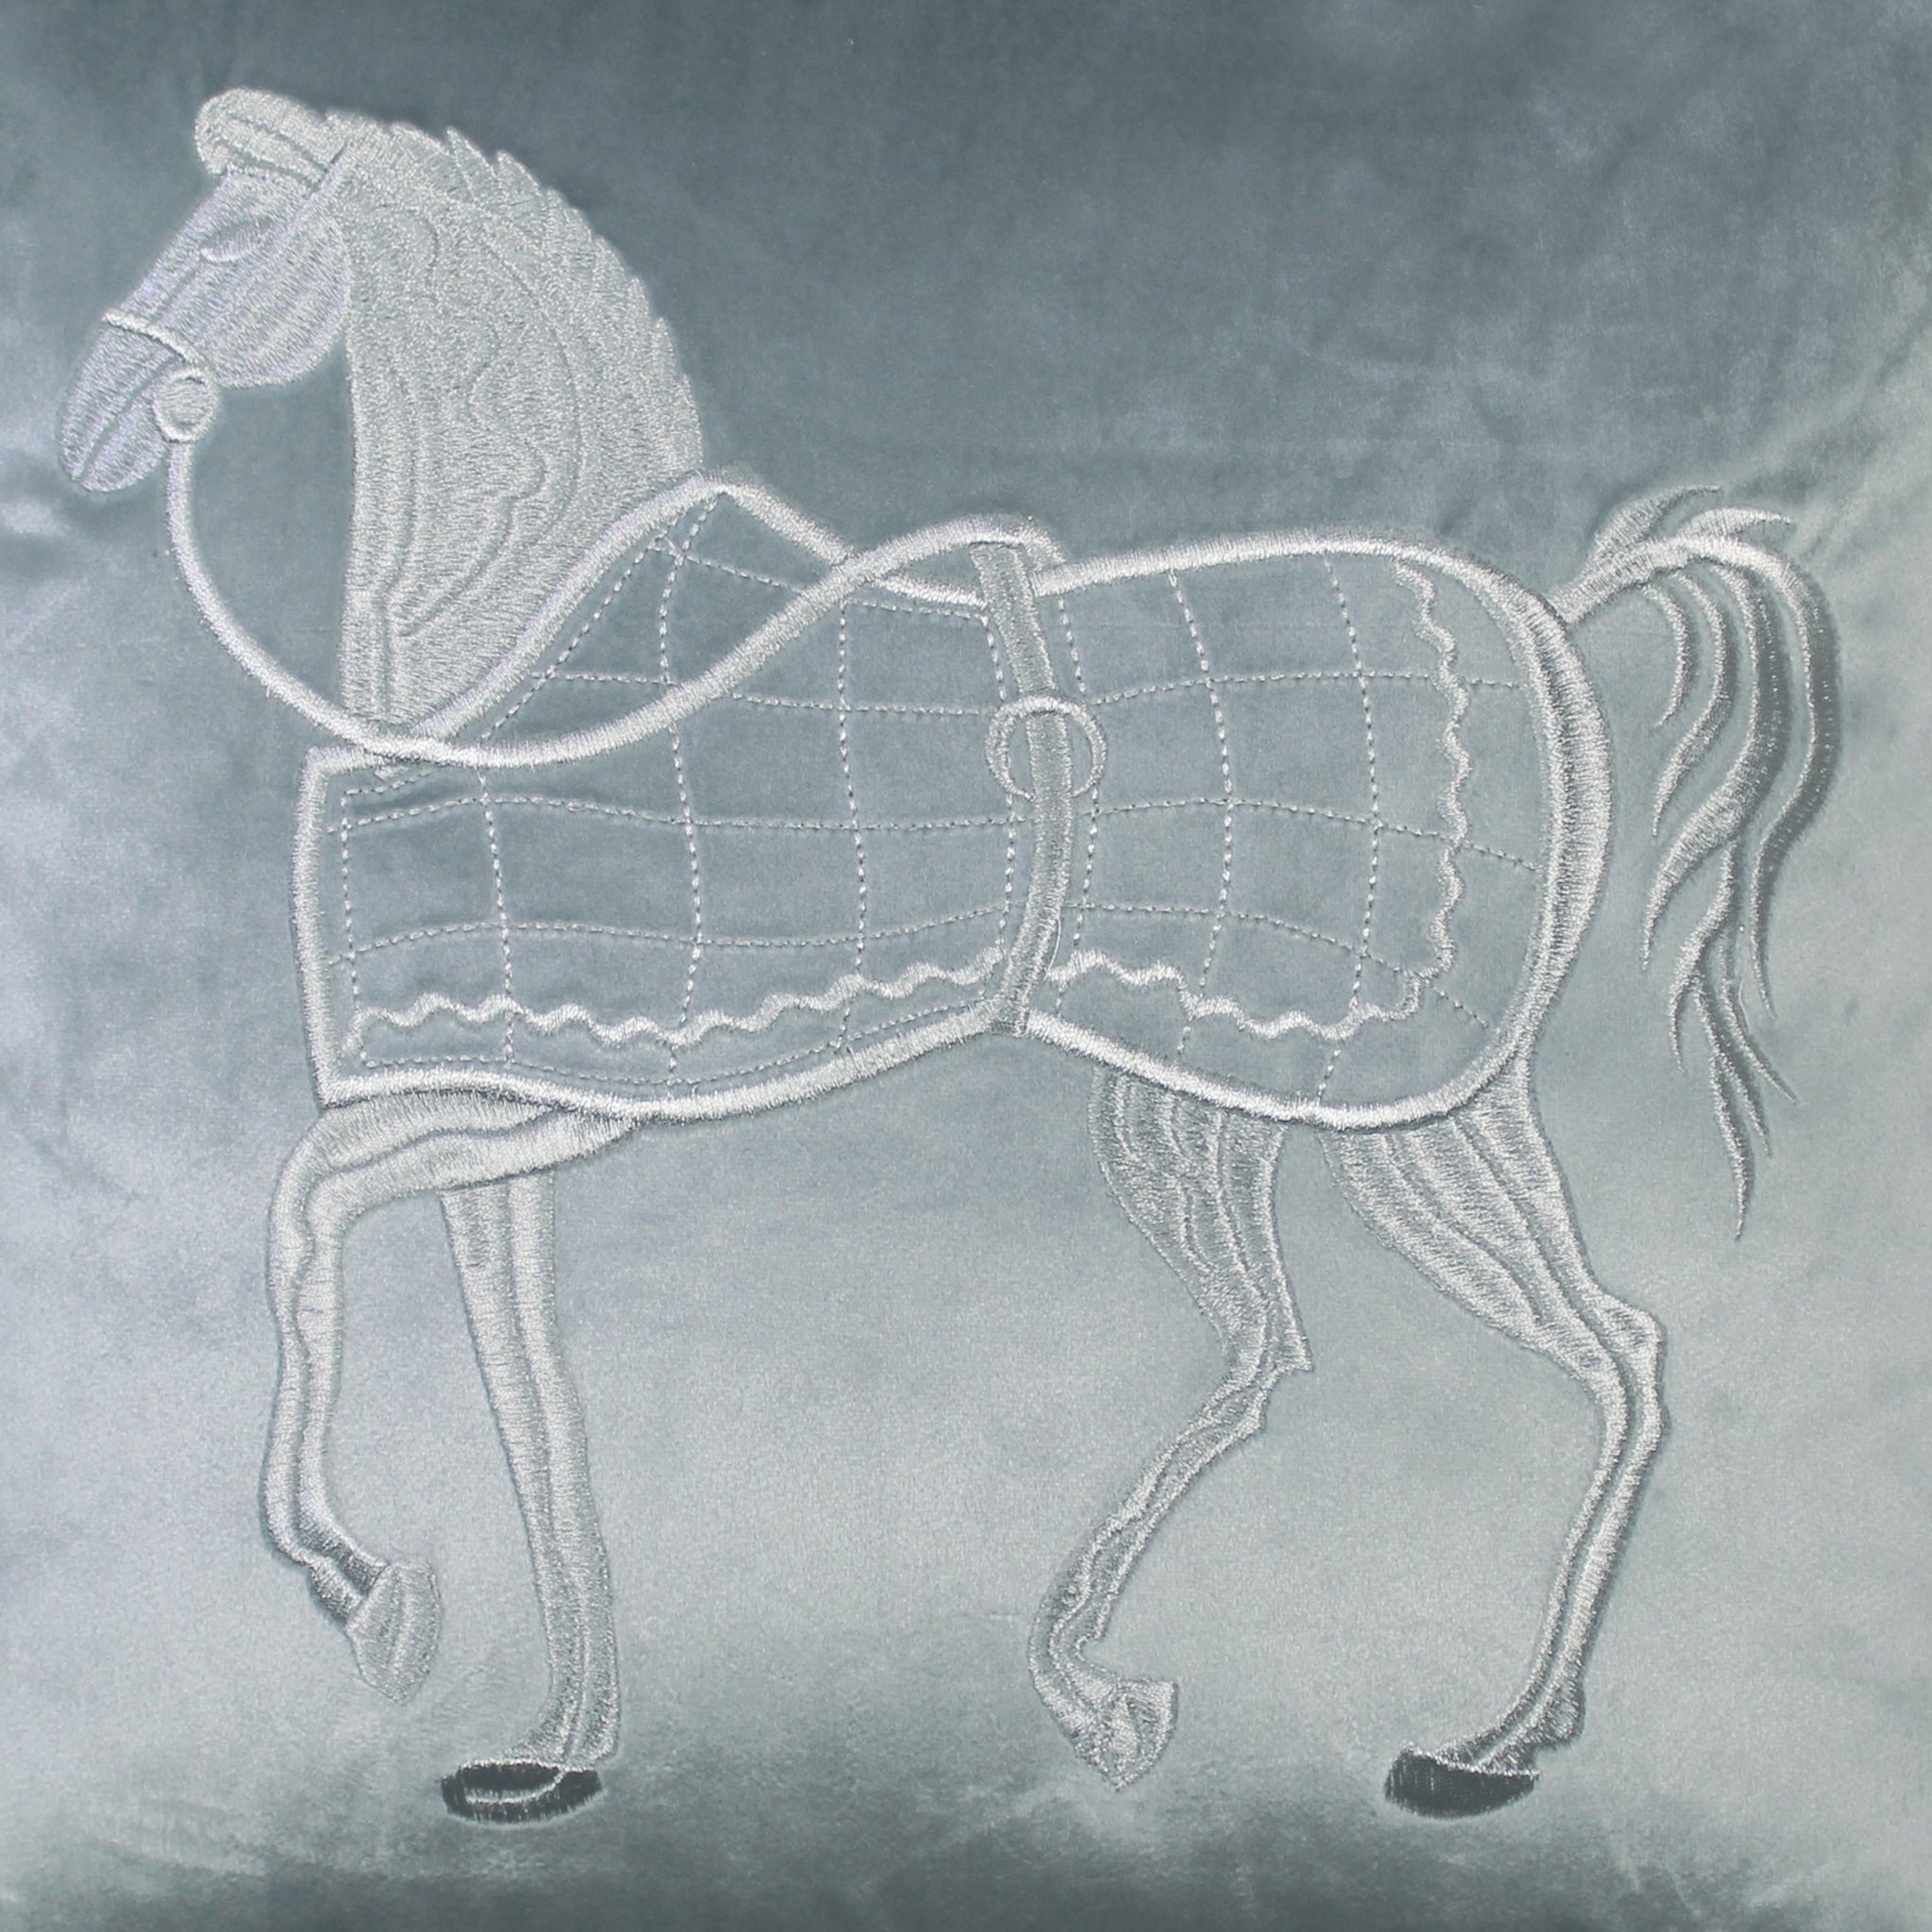 Silver Cushion Cover Velvet Decorative Pillow Cover Classic Horse Embroidery Home Decor Style Throw Pillow for Sofa Chair Bedroom Living Room 45x45 cm (18x18 Inches).